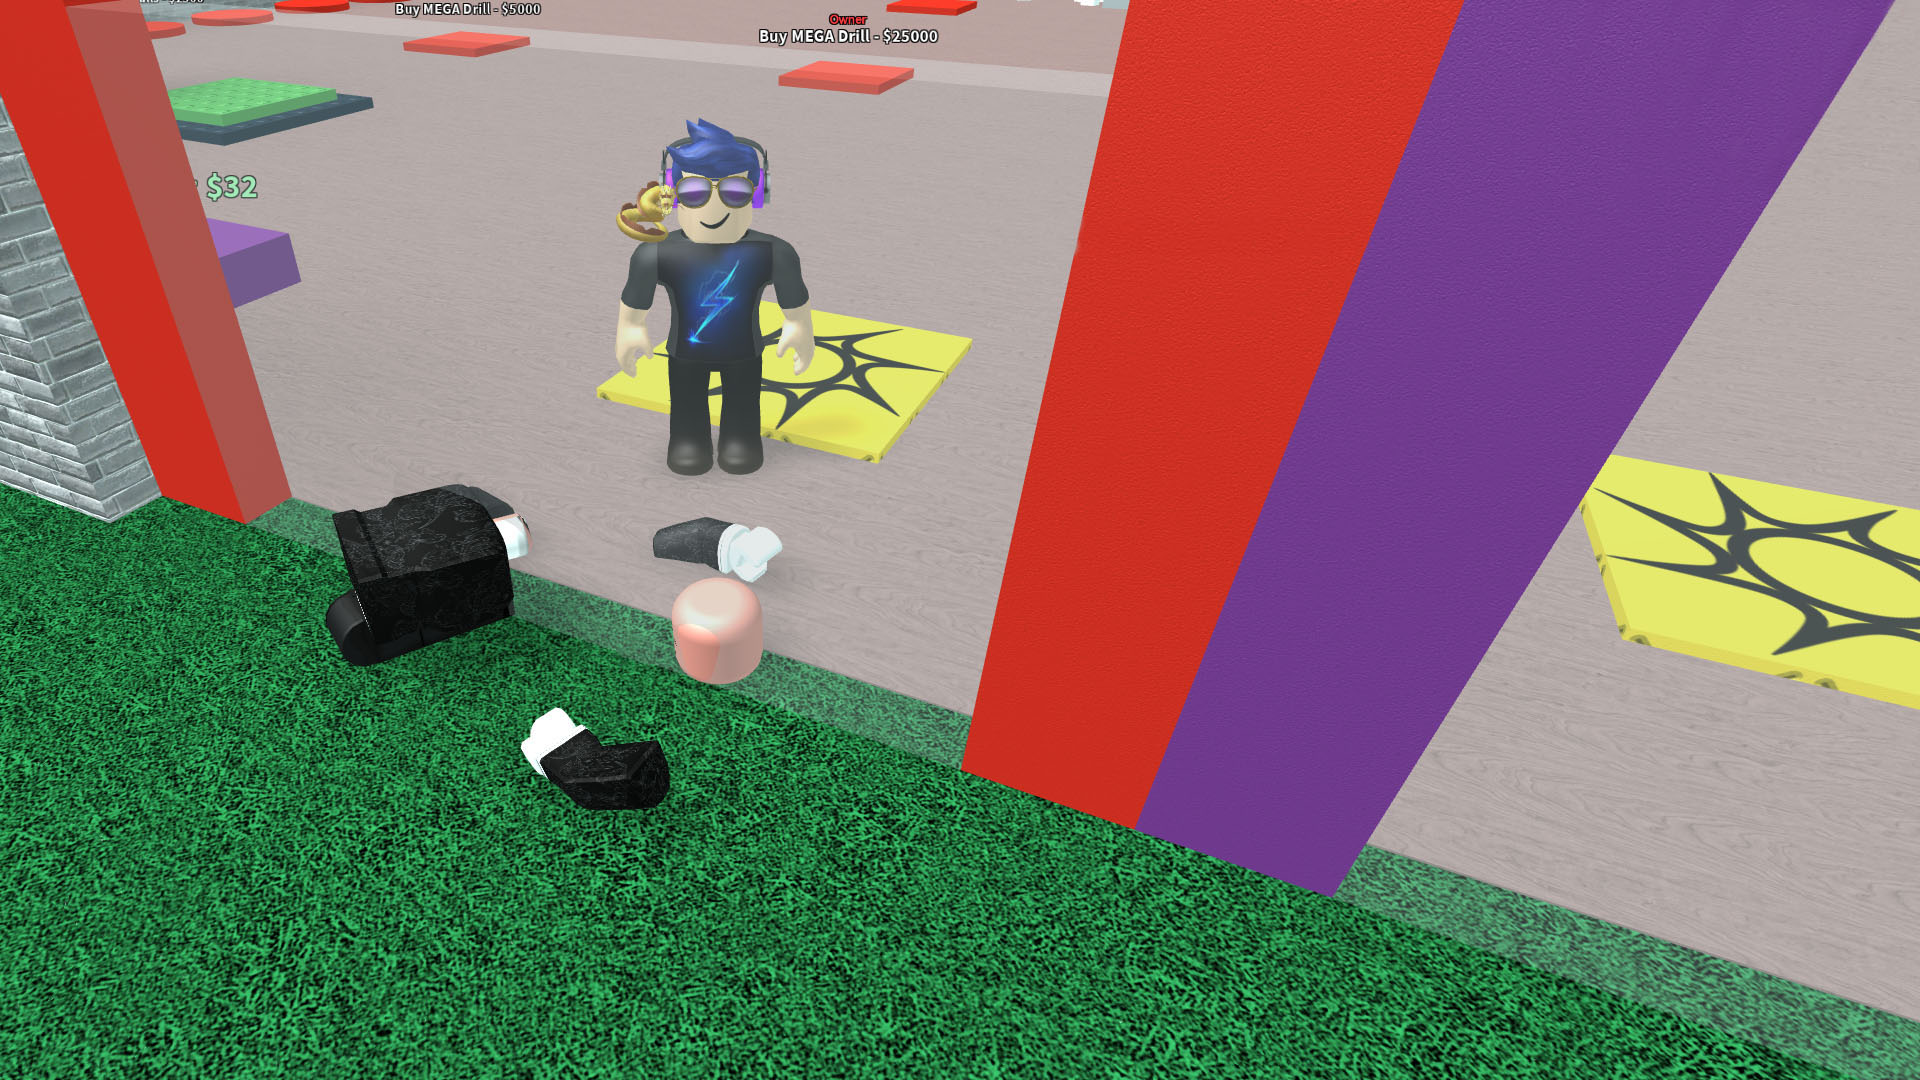 Striking Gold An Interview With Berezaa Roblox Blog - interview with maplestick roblox blog